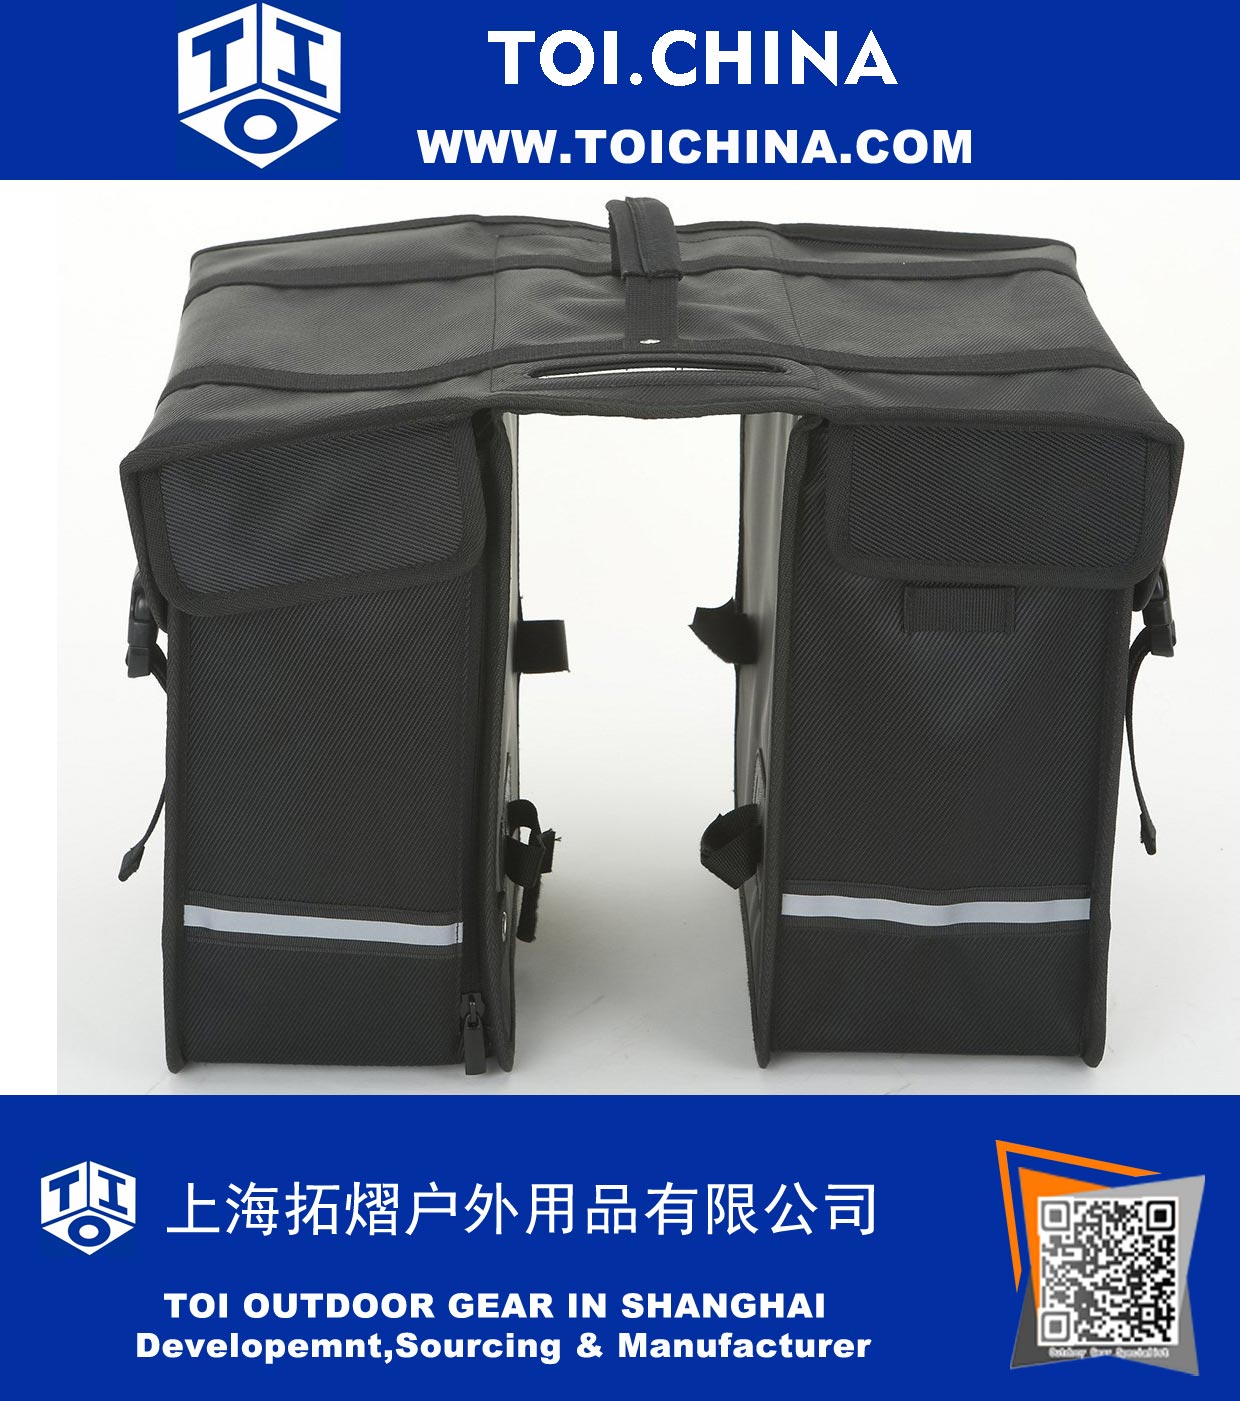 Cycling Outdoor Sports Bag